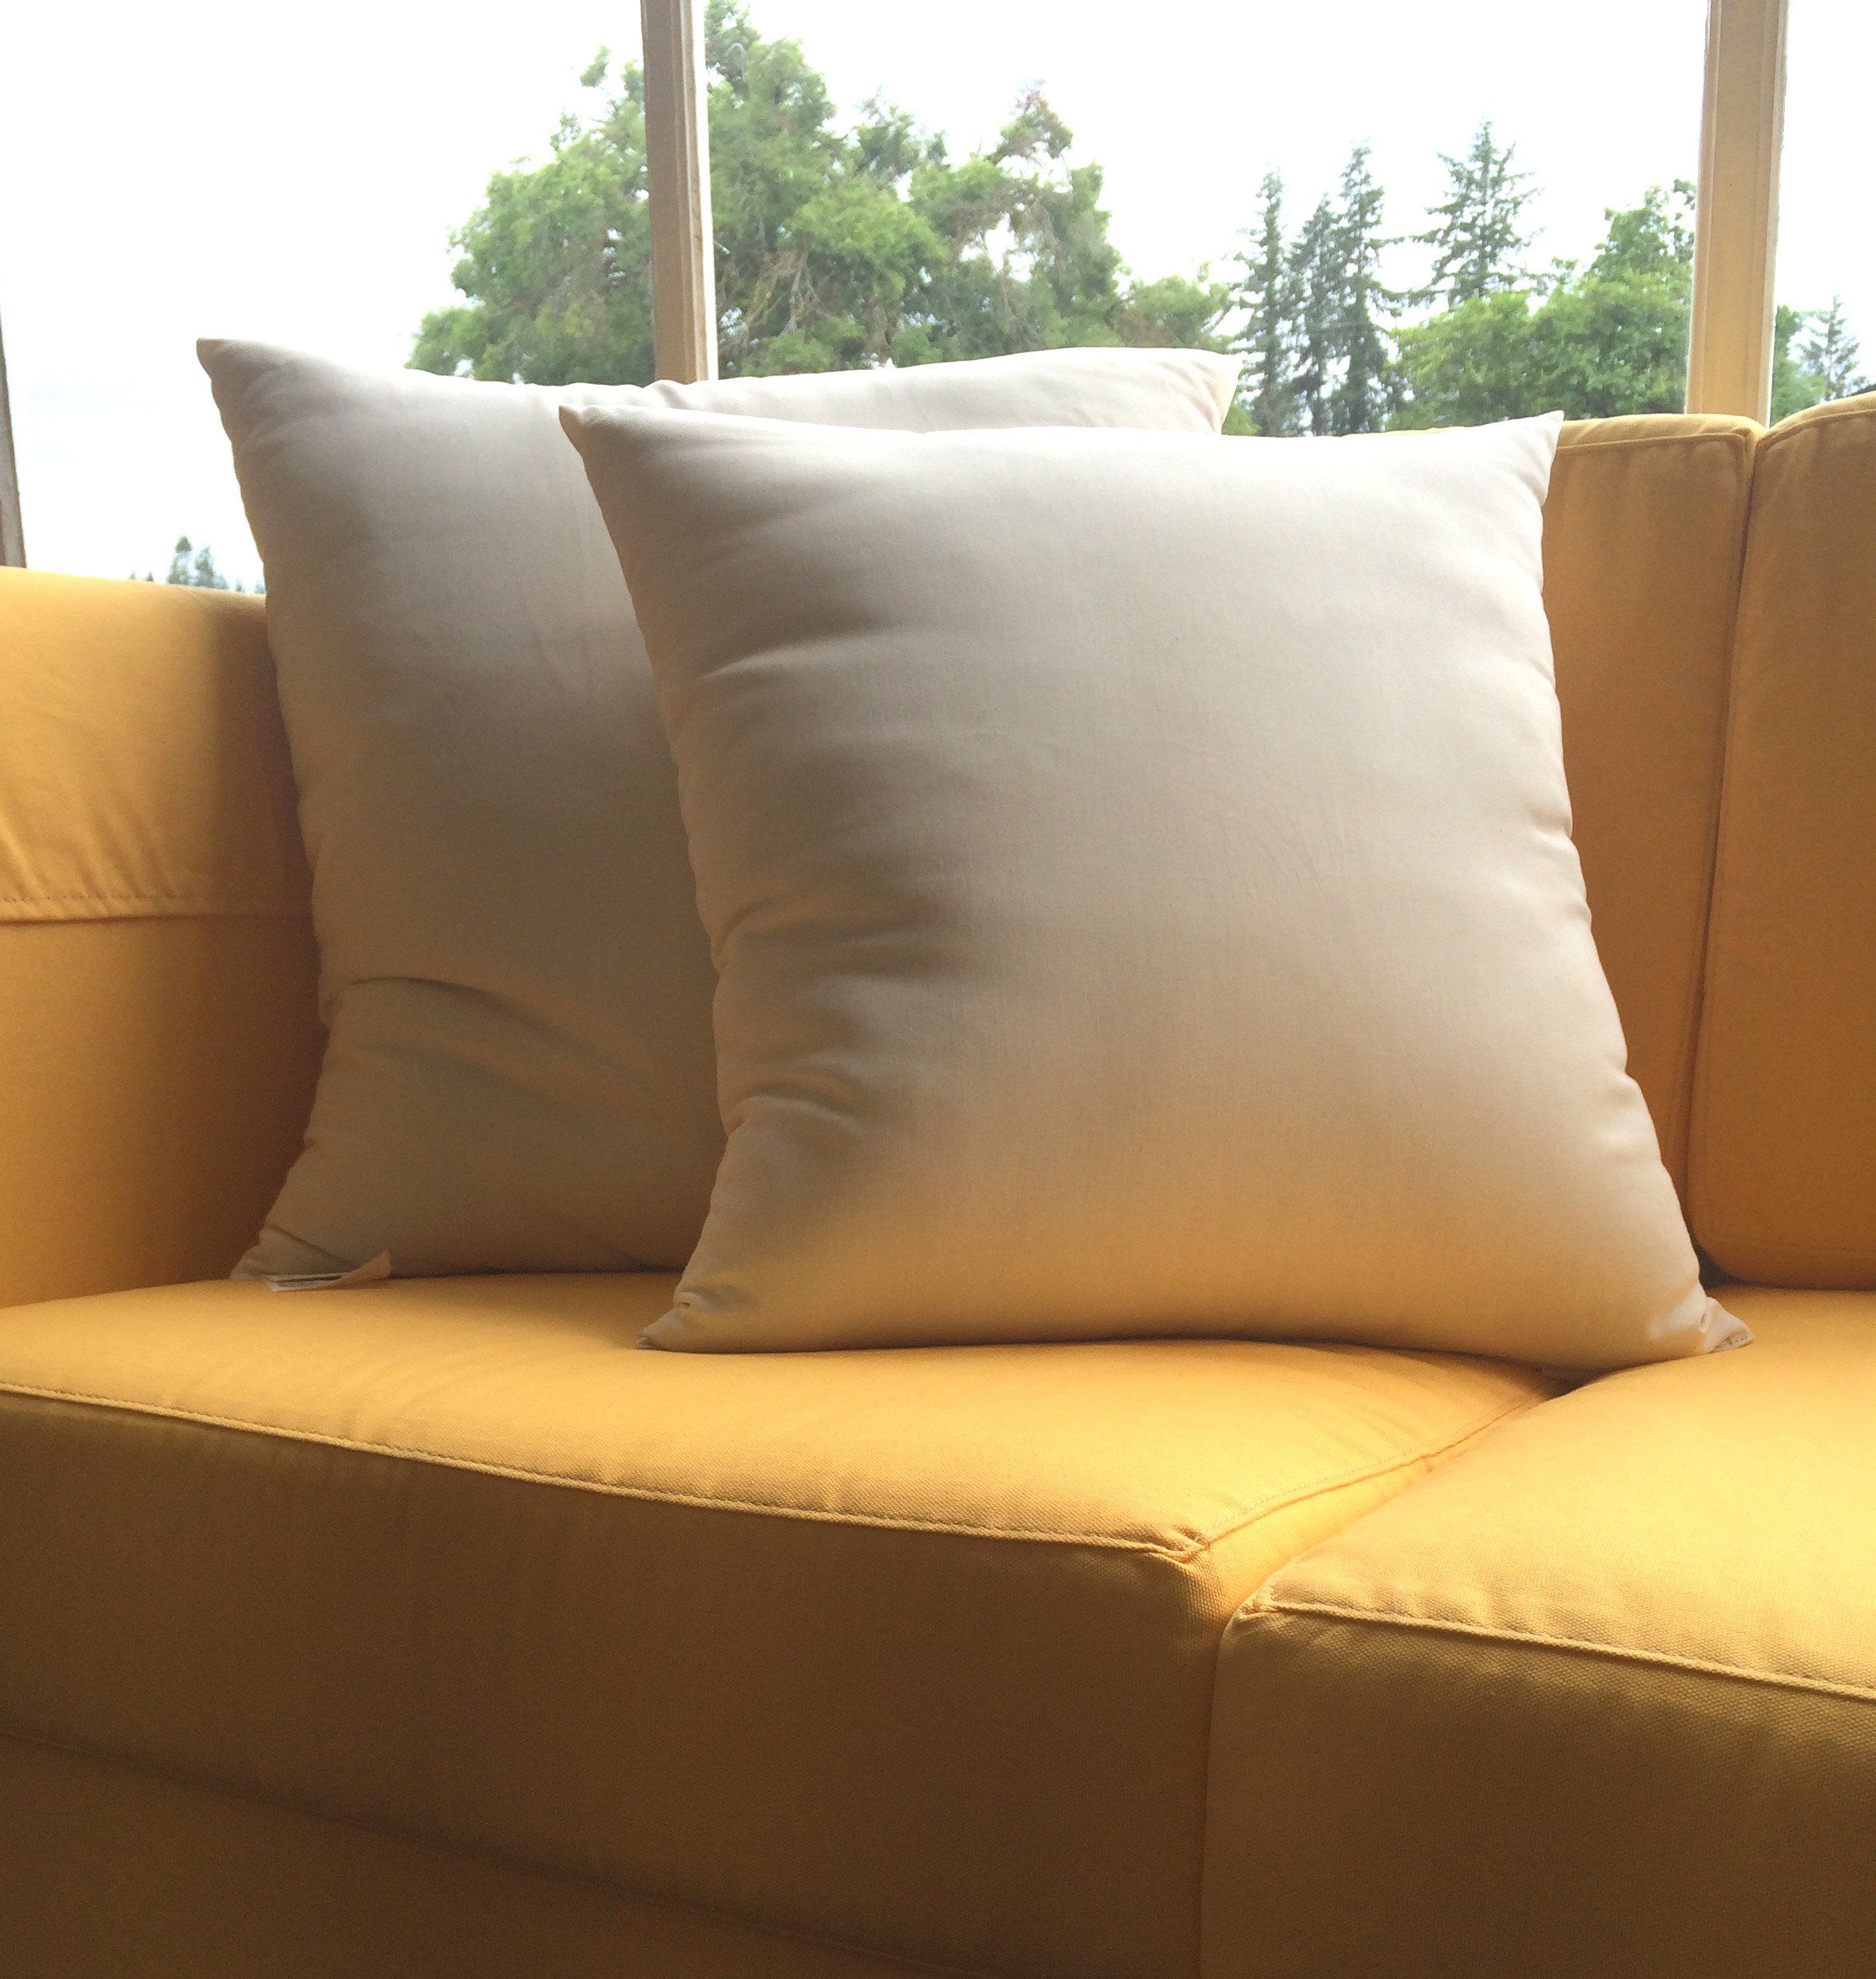 large couch pillow covers 24x24